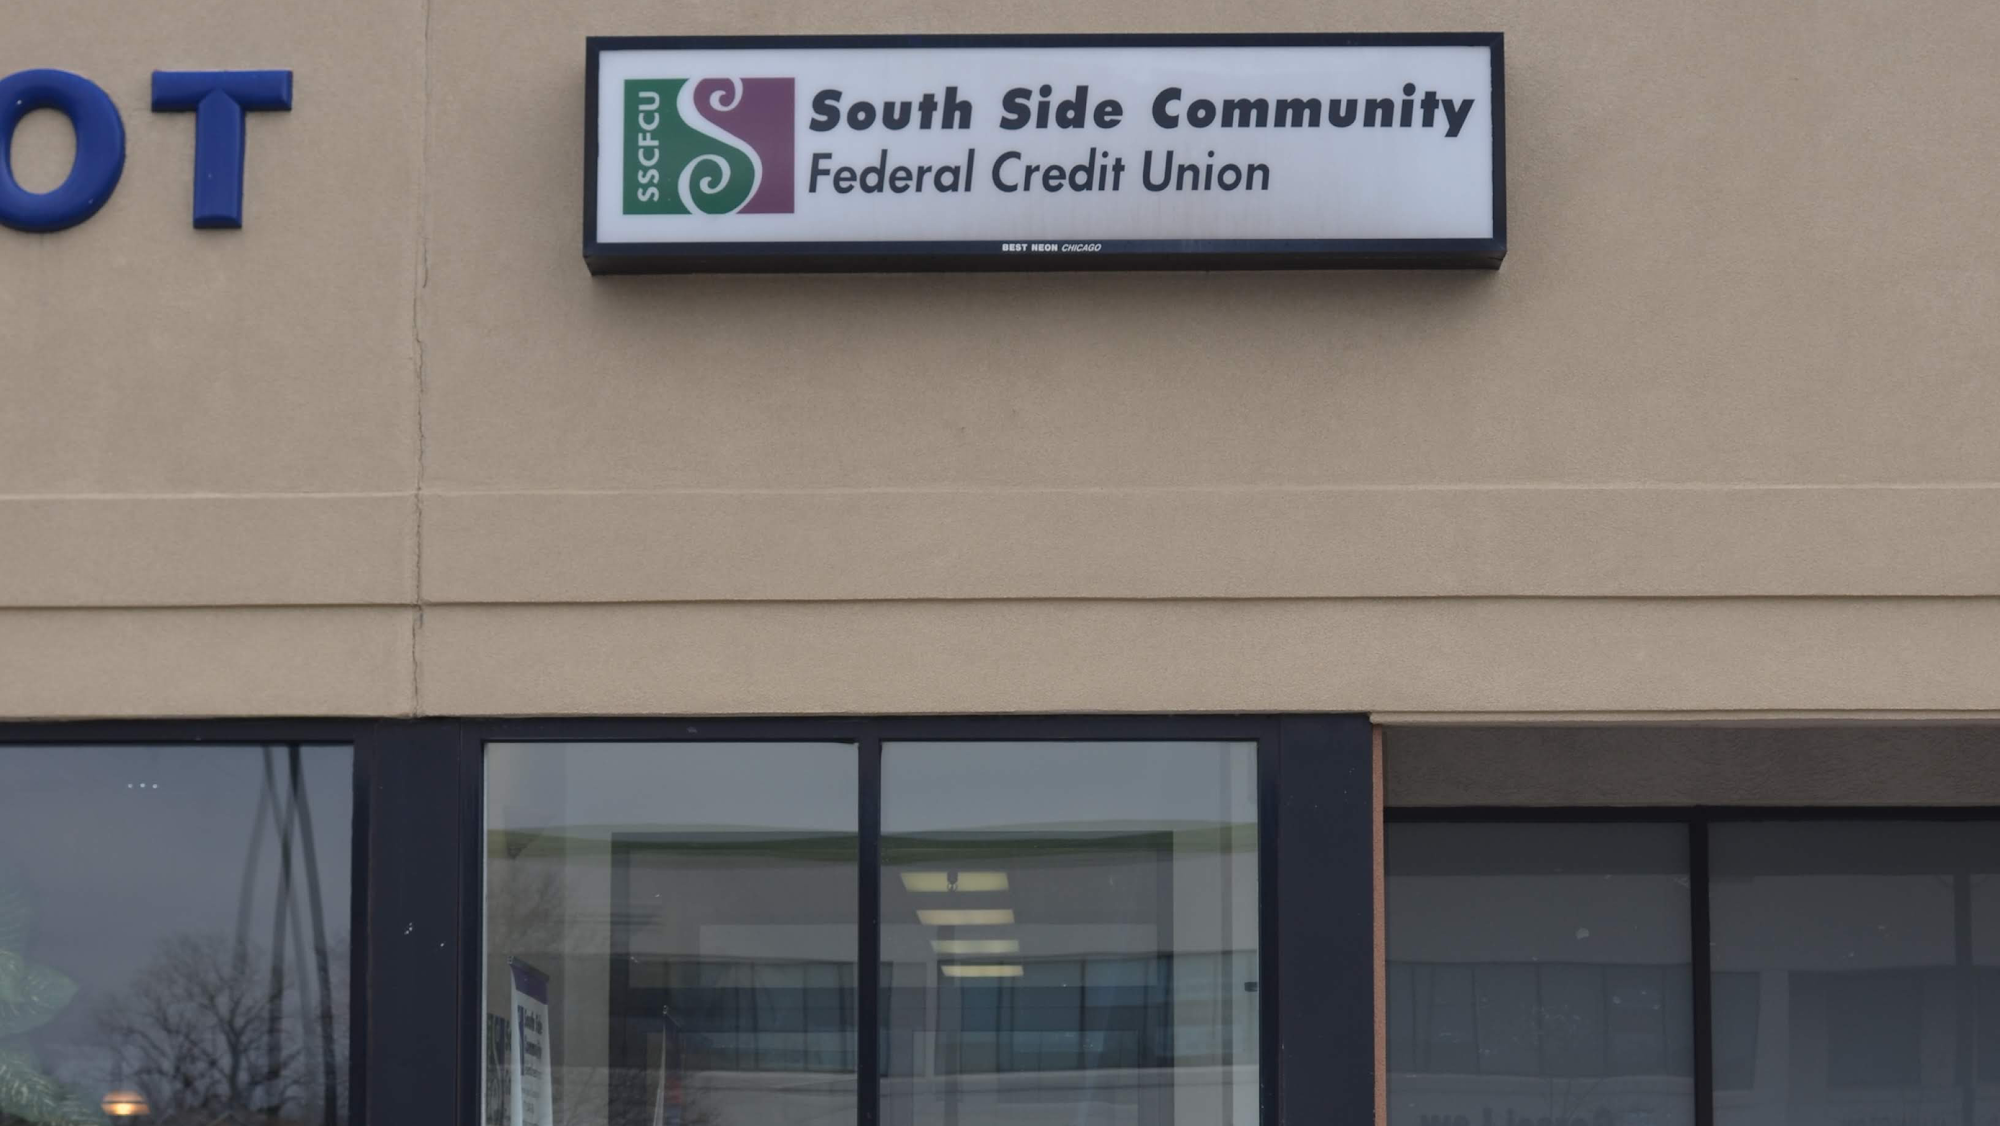 South Side Community Federal Credit Union